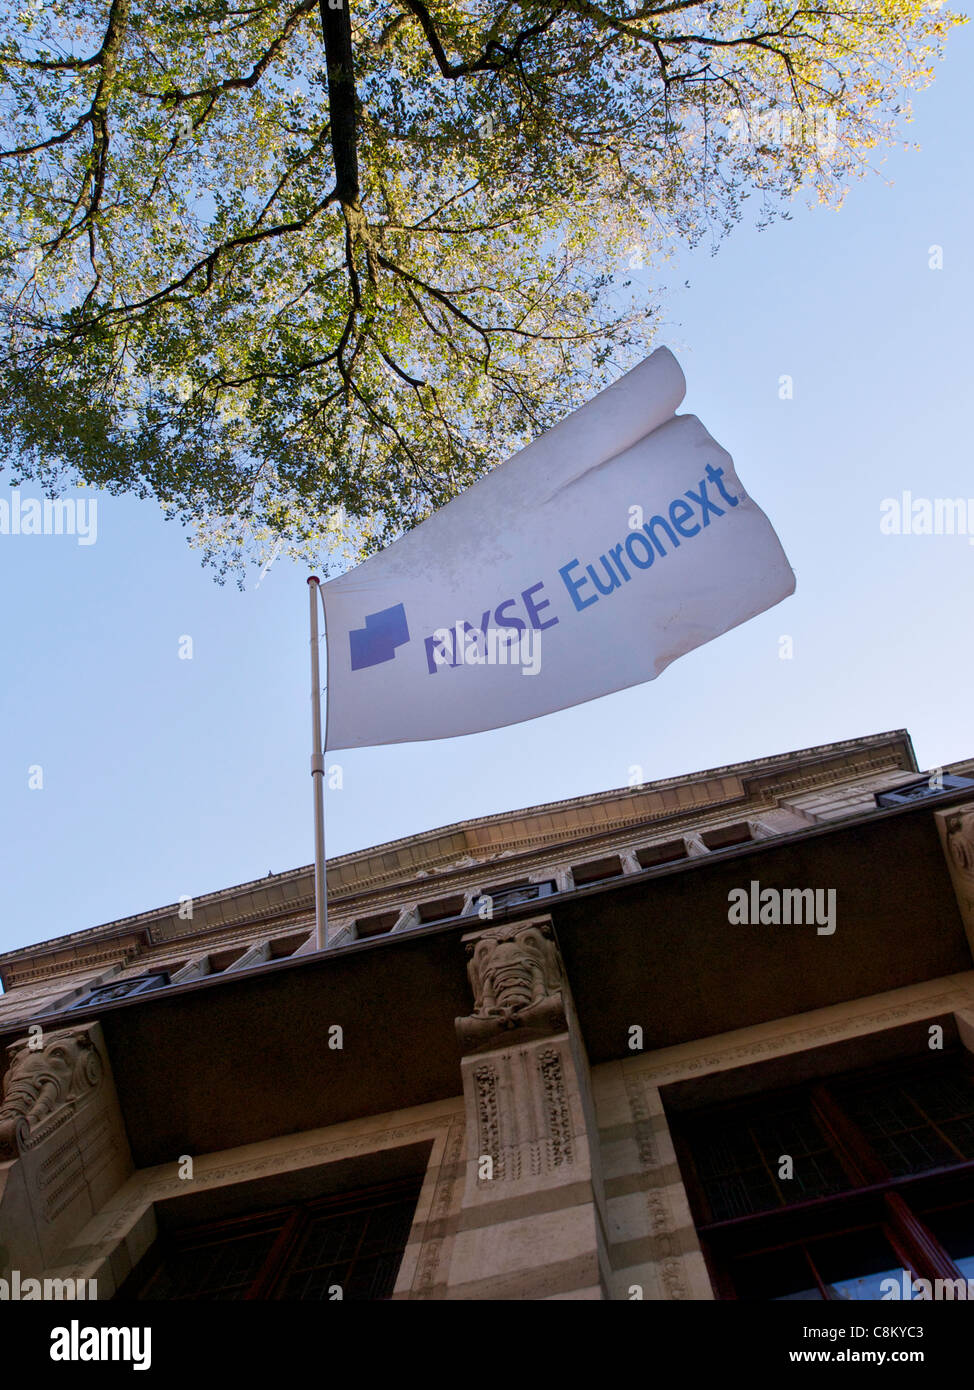 NYSE Euronext flag at beursplein 5 in Amsterdam, the Netherlands Stock Photo